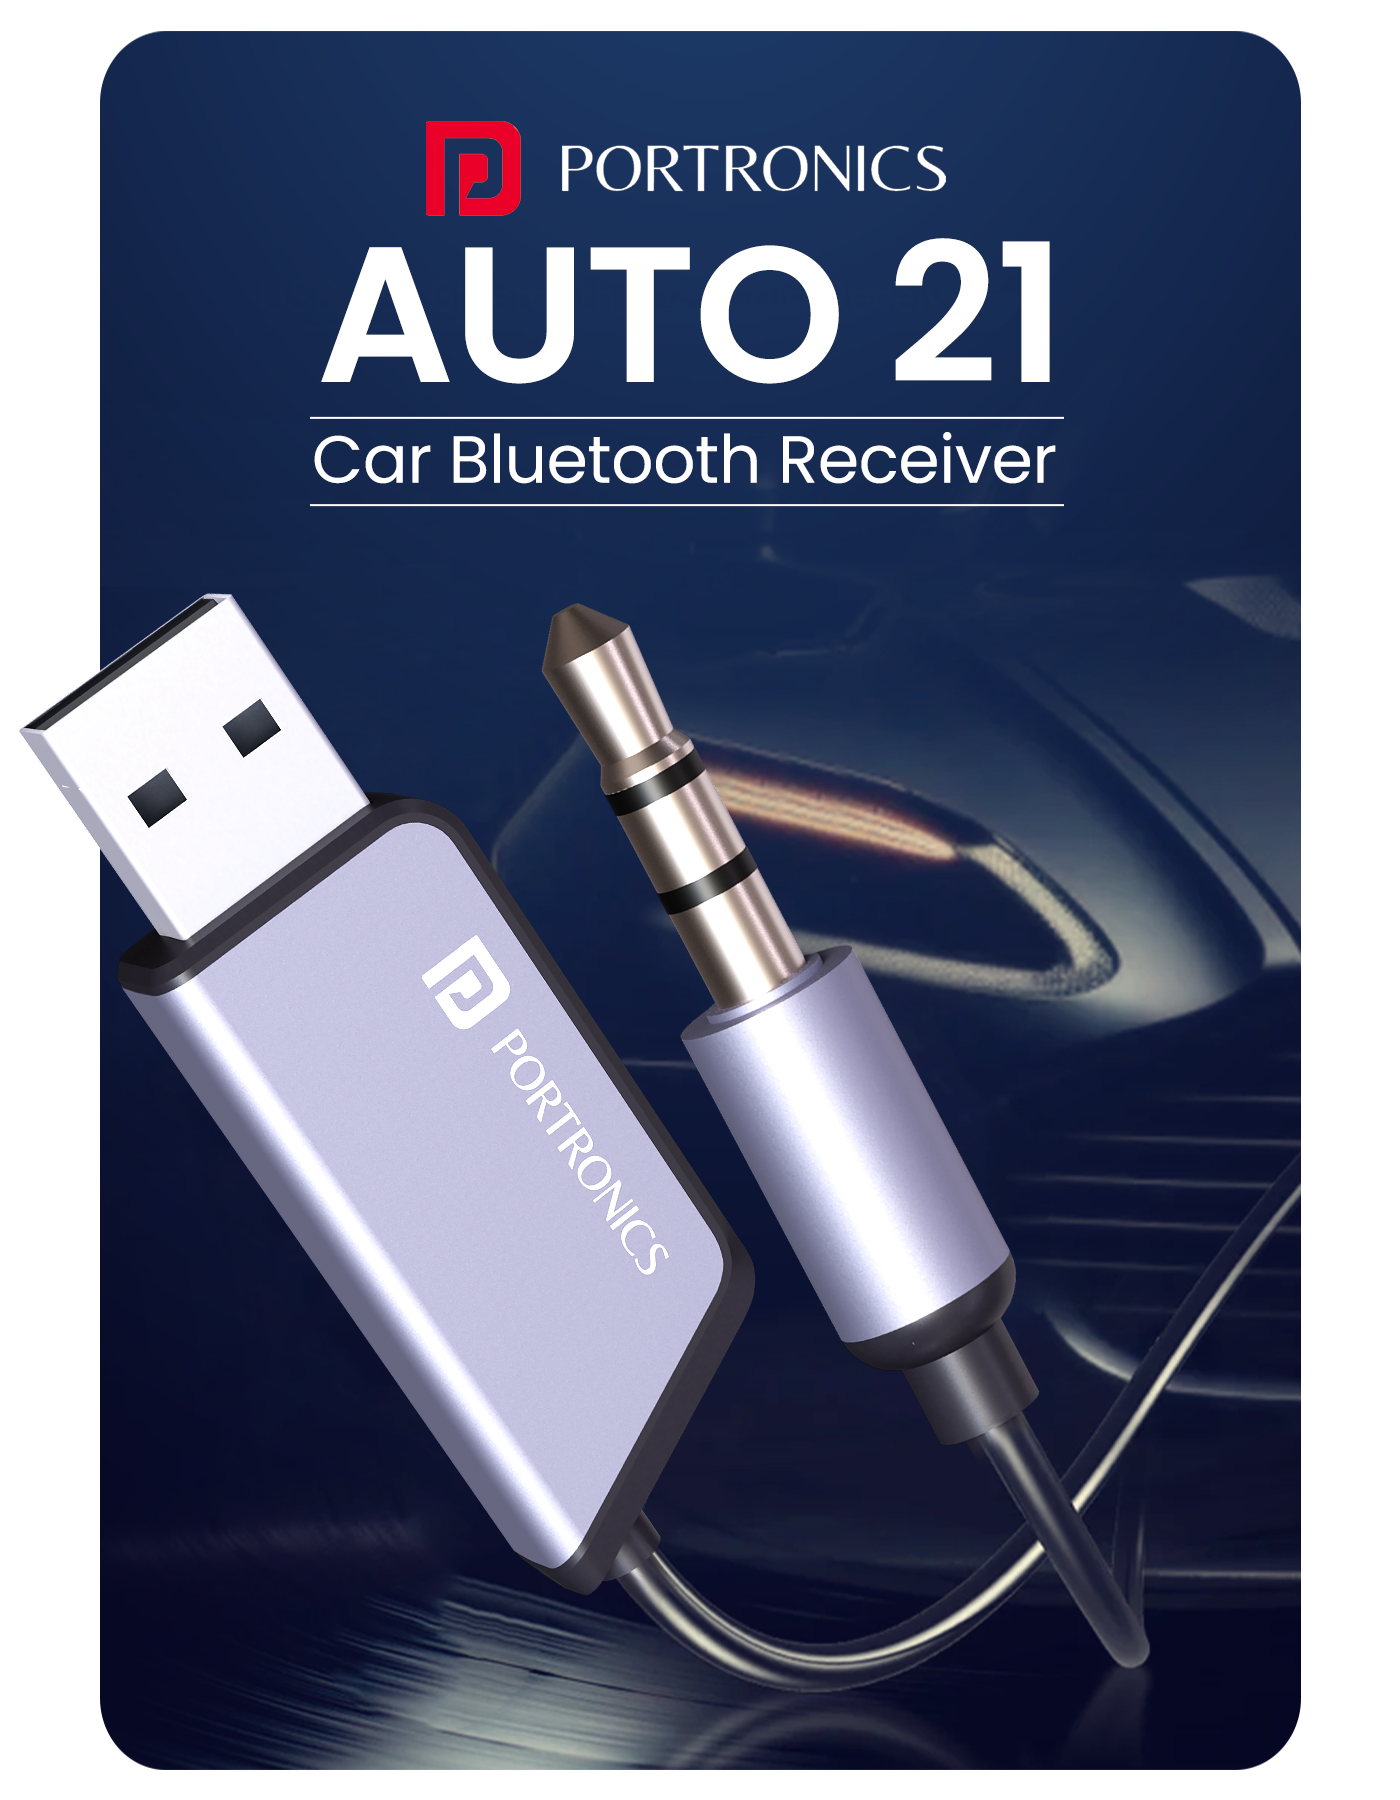 Portronics Auto 21smart car connector enjoy hands free calling wile driving